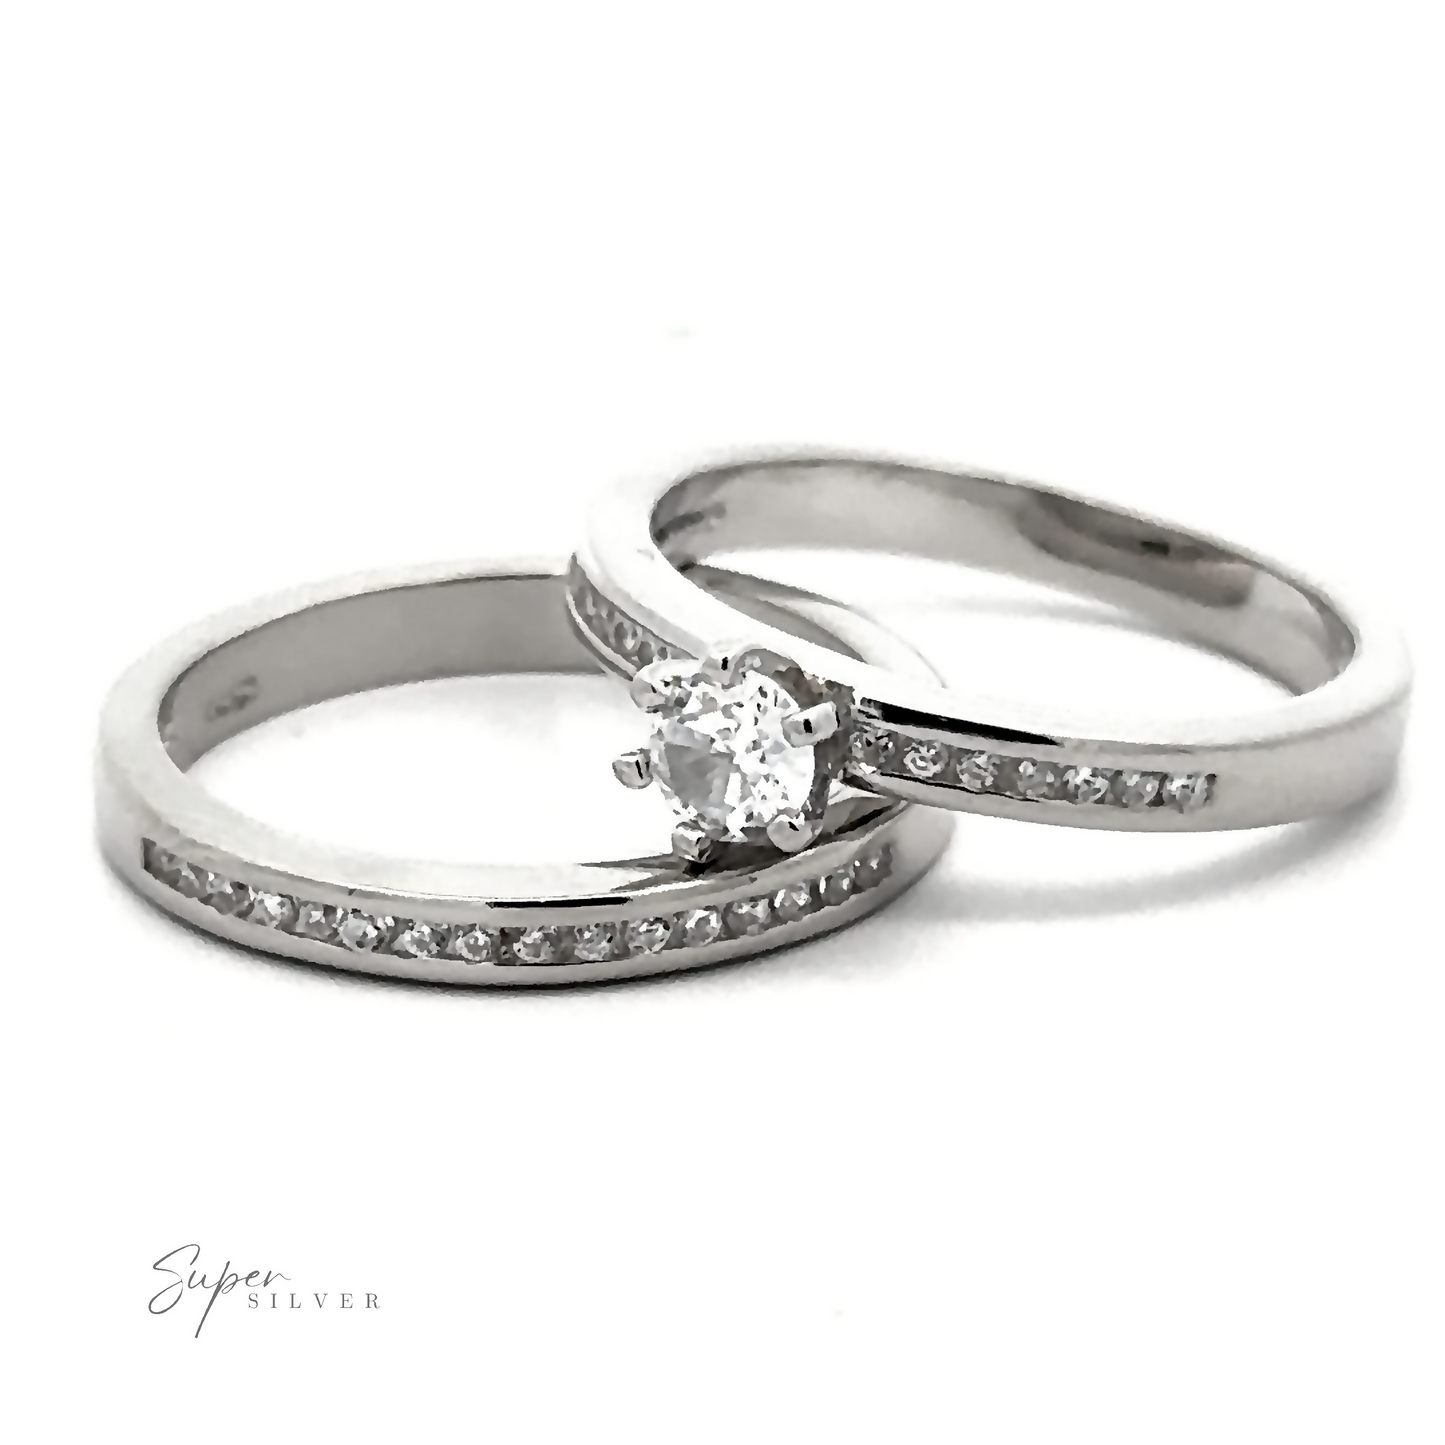 Two sterling silver rings are shown. One features a solitaire cubic zirconia, while the other, a Brilliant Round Cubic Zirconia Wedding Ring Set, has smaller diamonds set into the rhodium finish band.